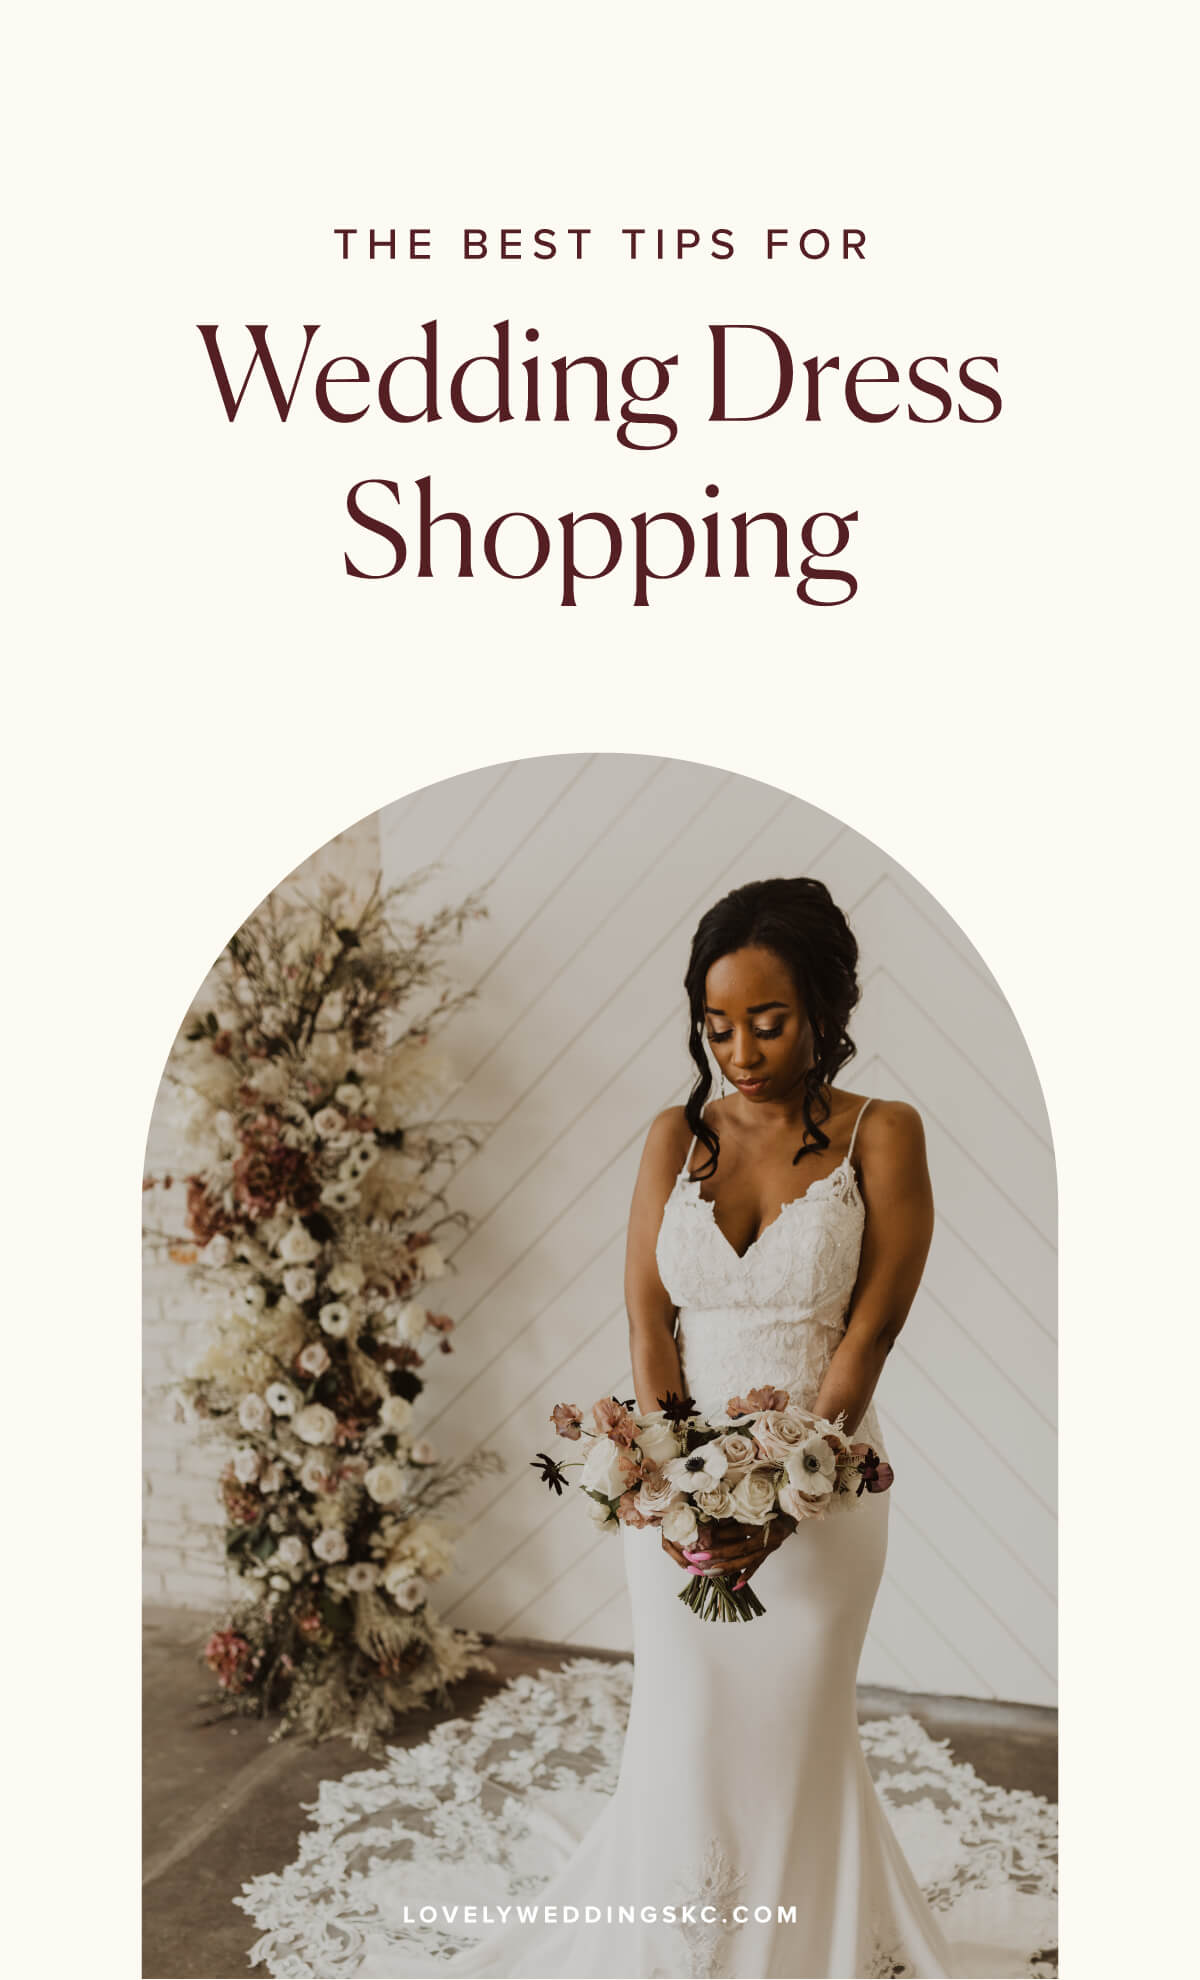 How to Prepare for Wedding Dress Shopping - 7 Shopping Tips